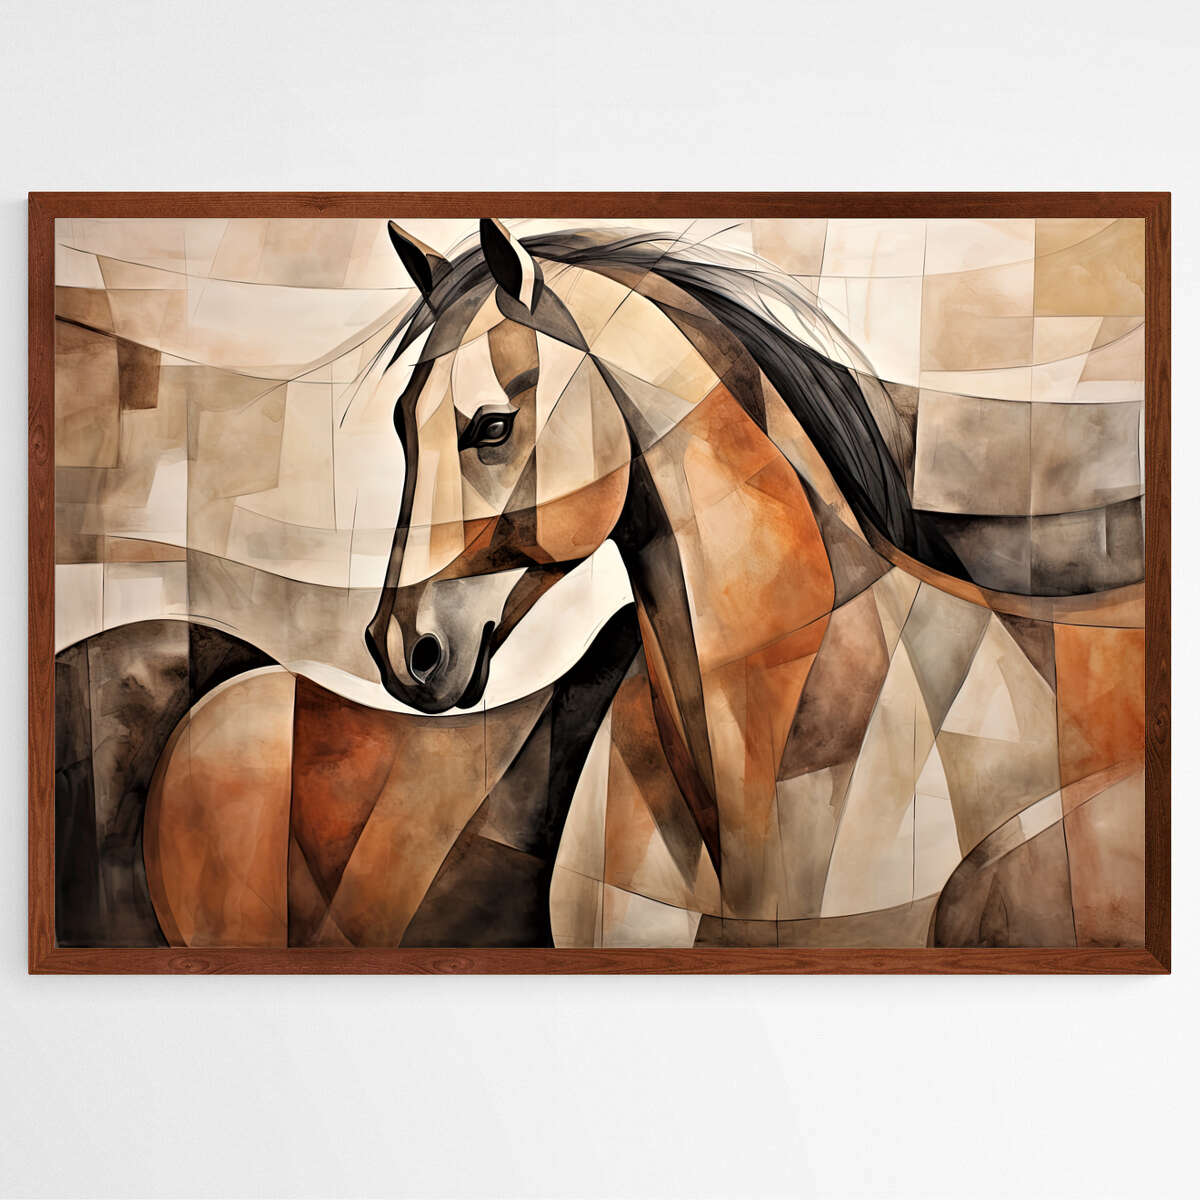 Abstract Horse Art in Earth Tones | Animals Wall Art Prints - The Canvas Hive